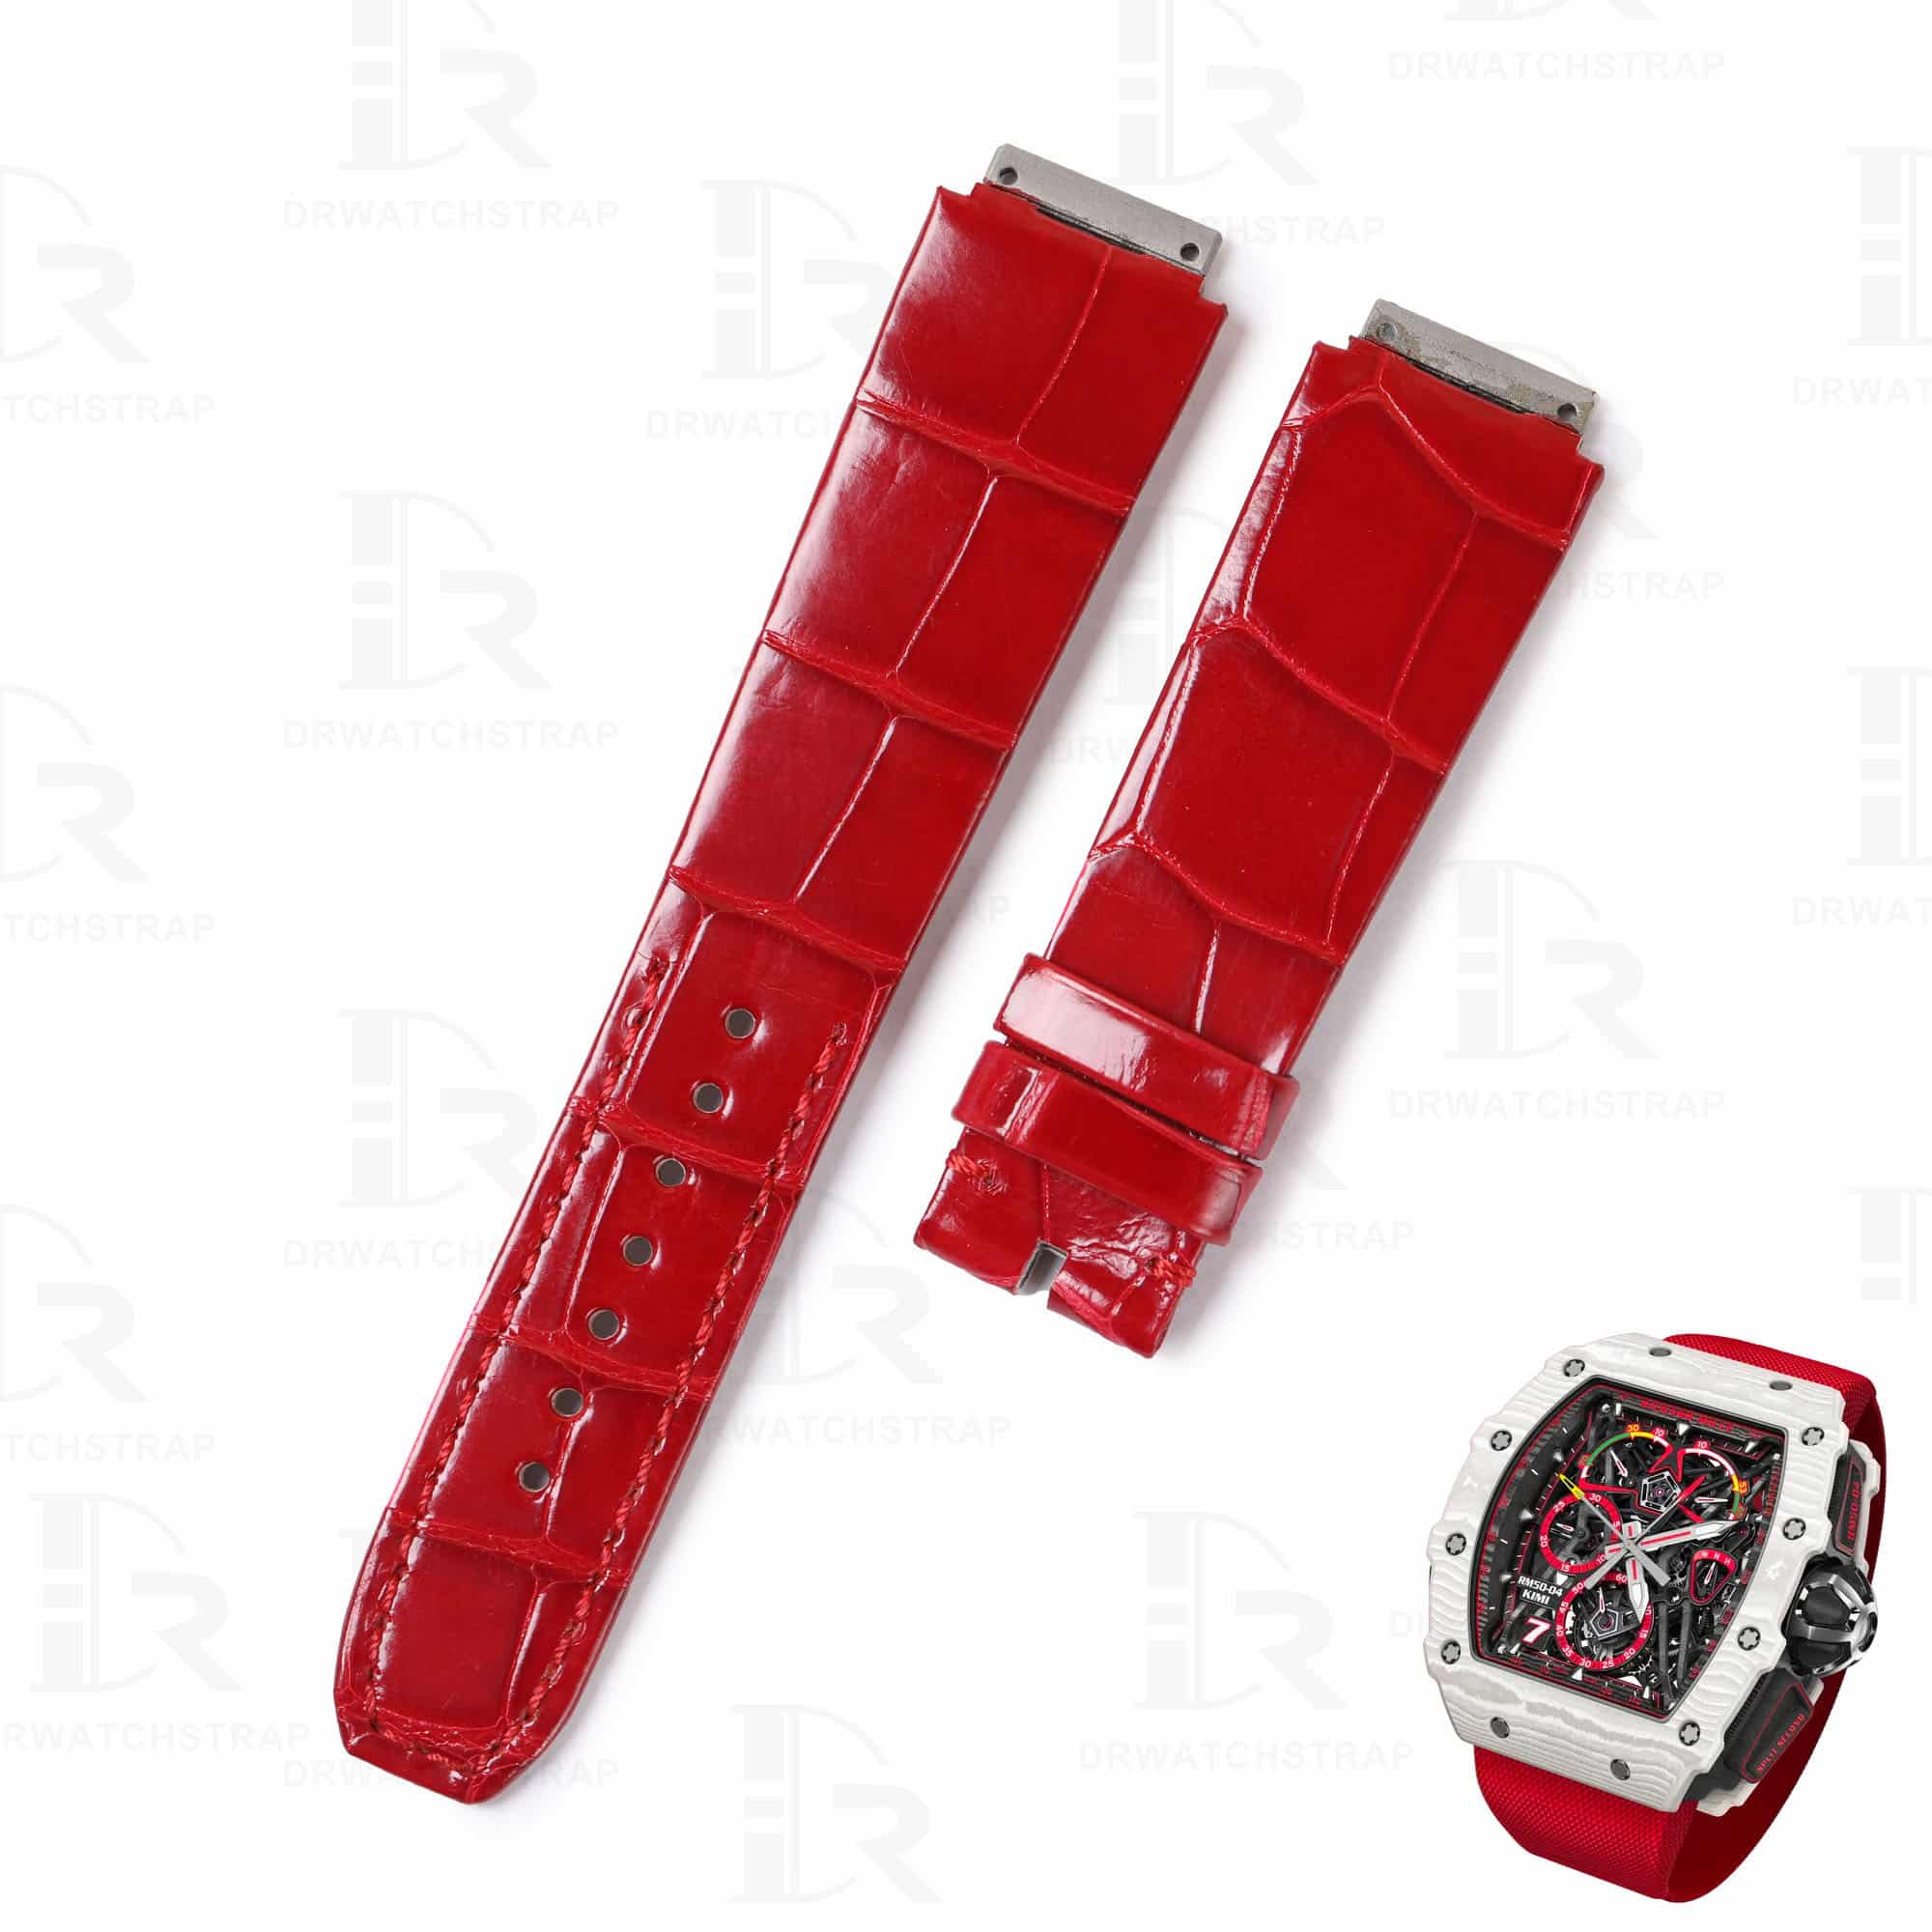 Replacement crocodile alligator red leather straps for Richard Mille watch bands